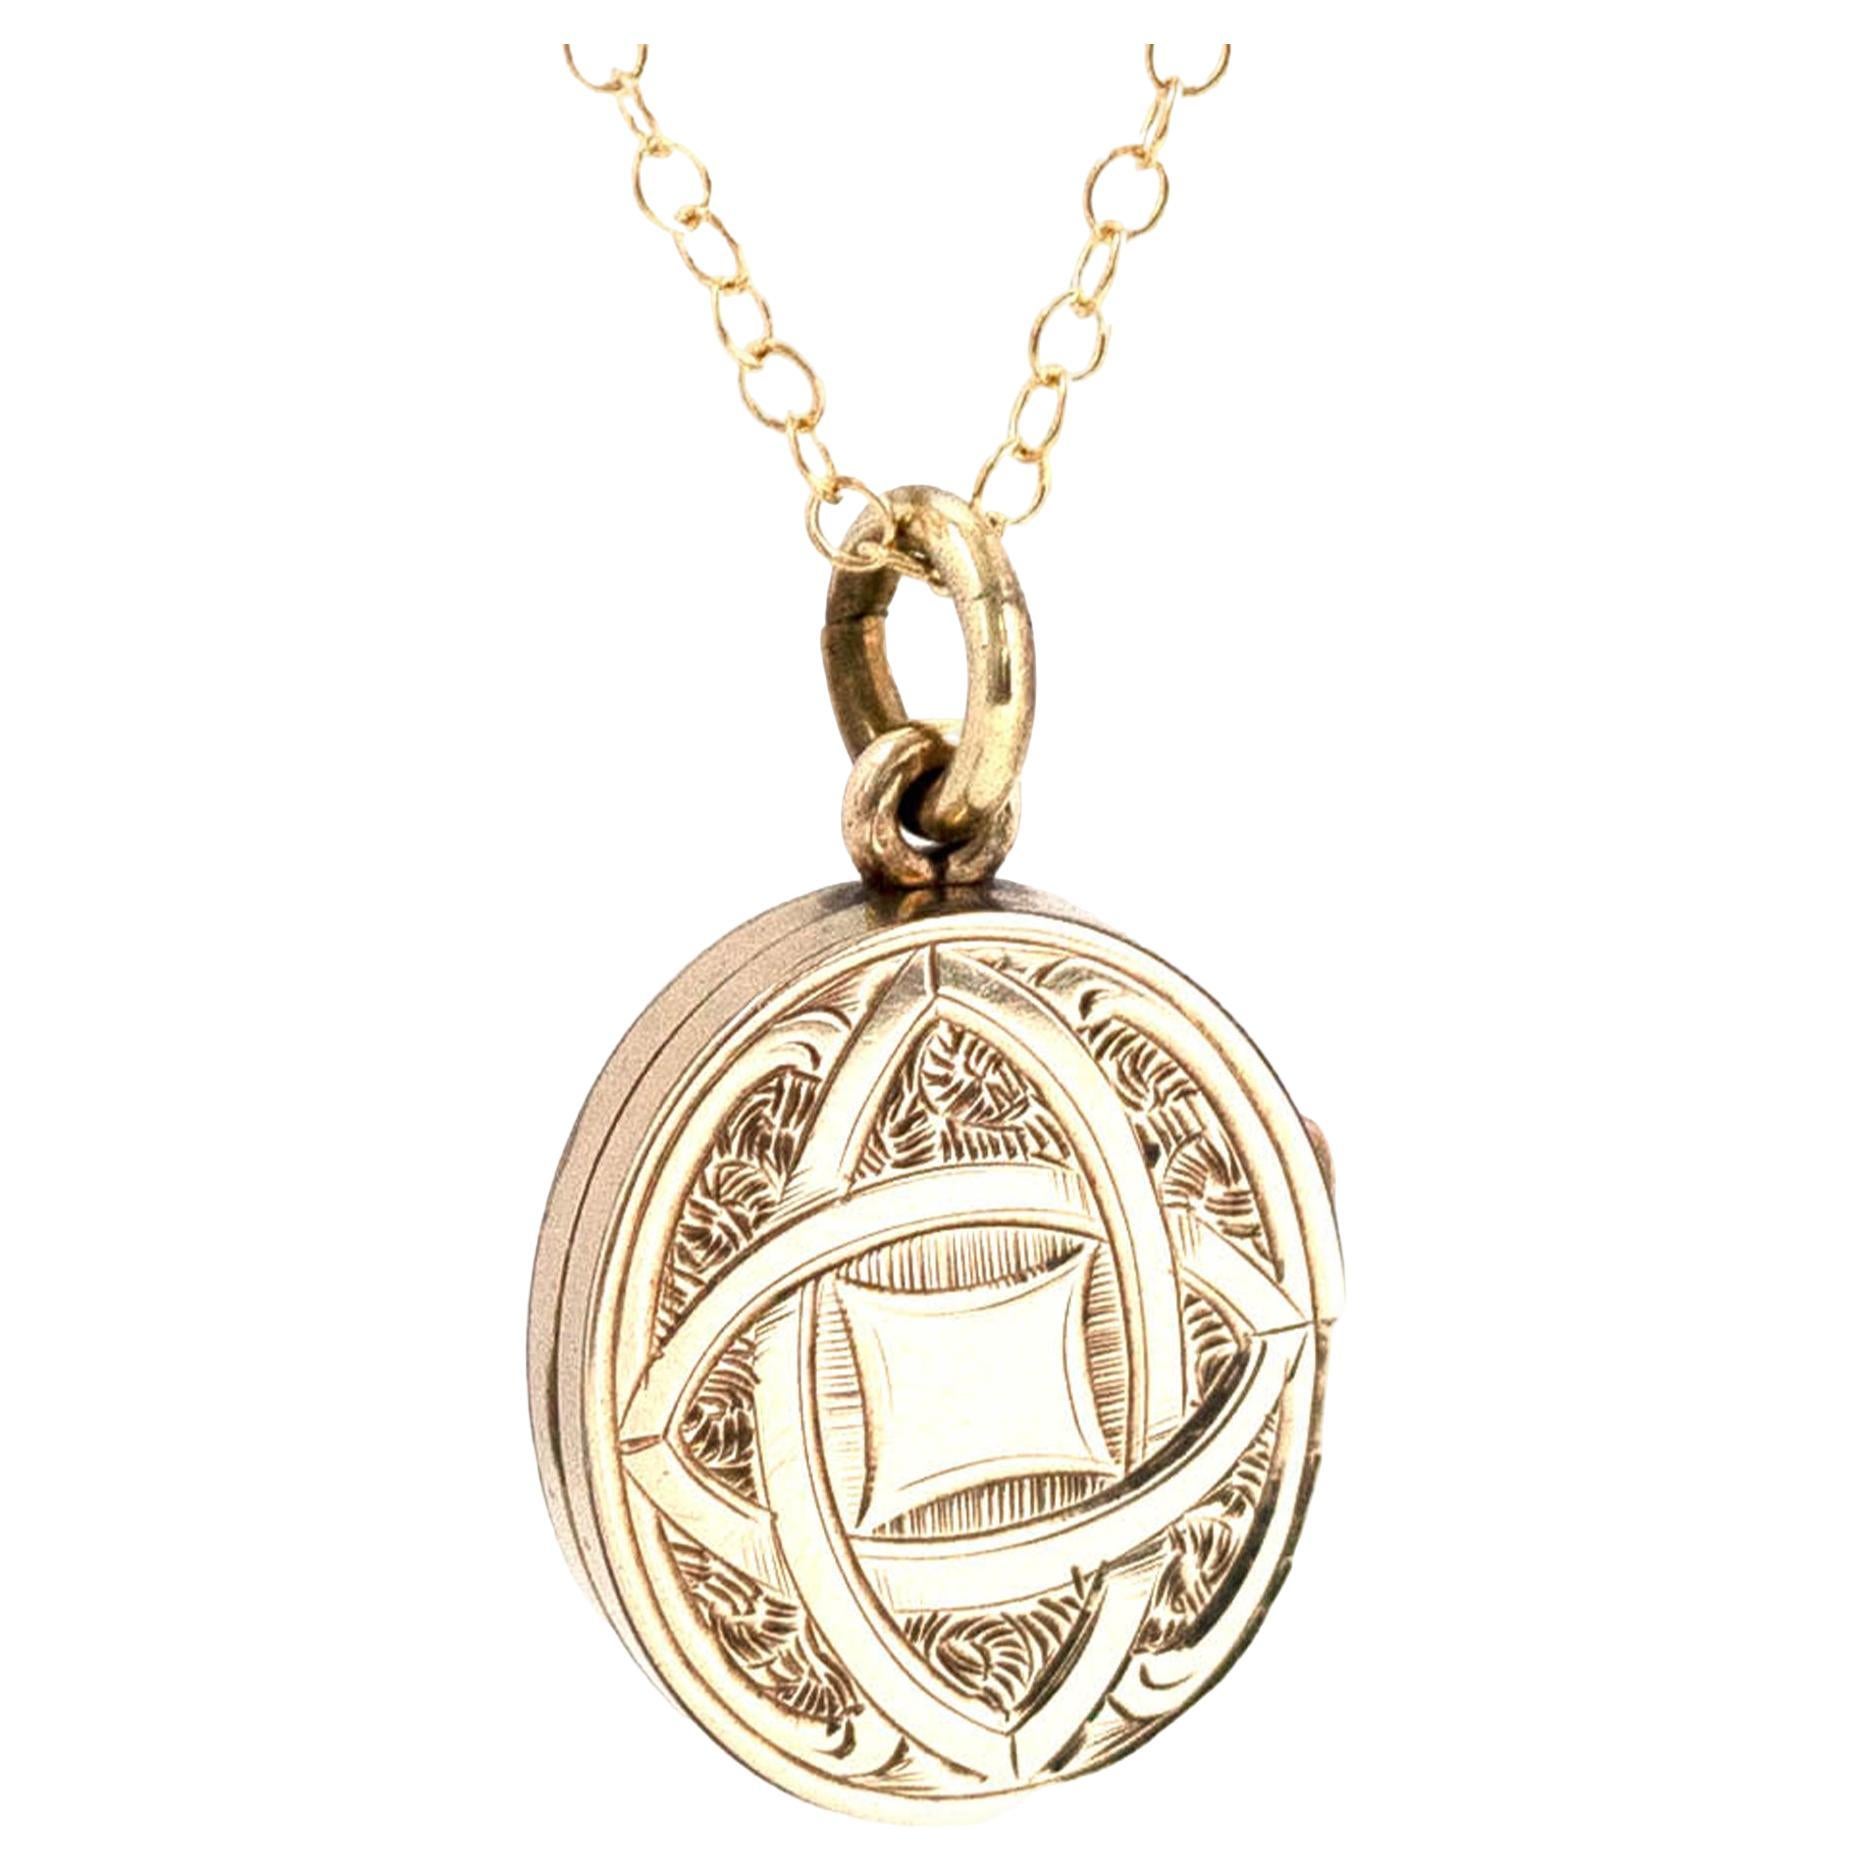 Antique Victorian Engraved 9ct Gold Locket Necklace